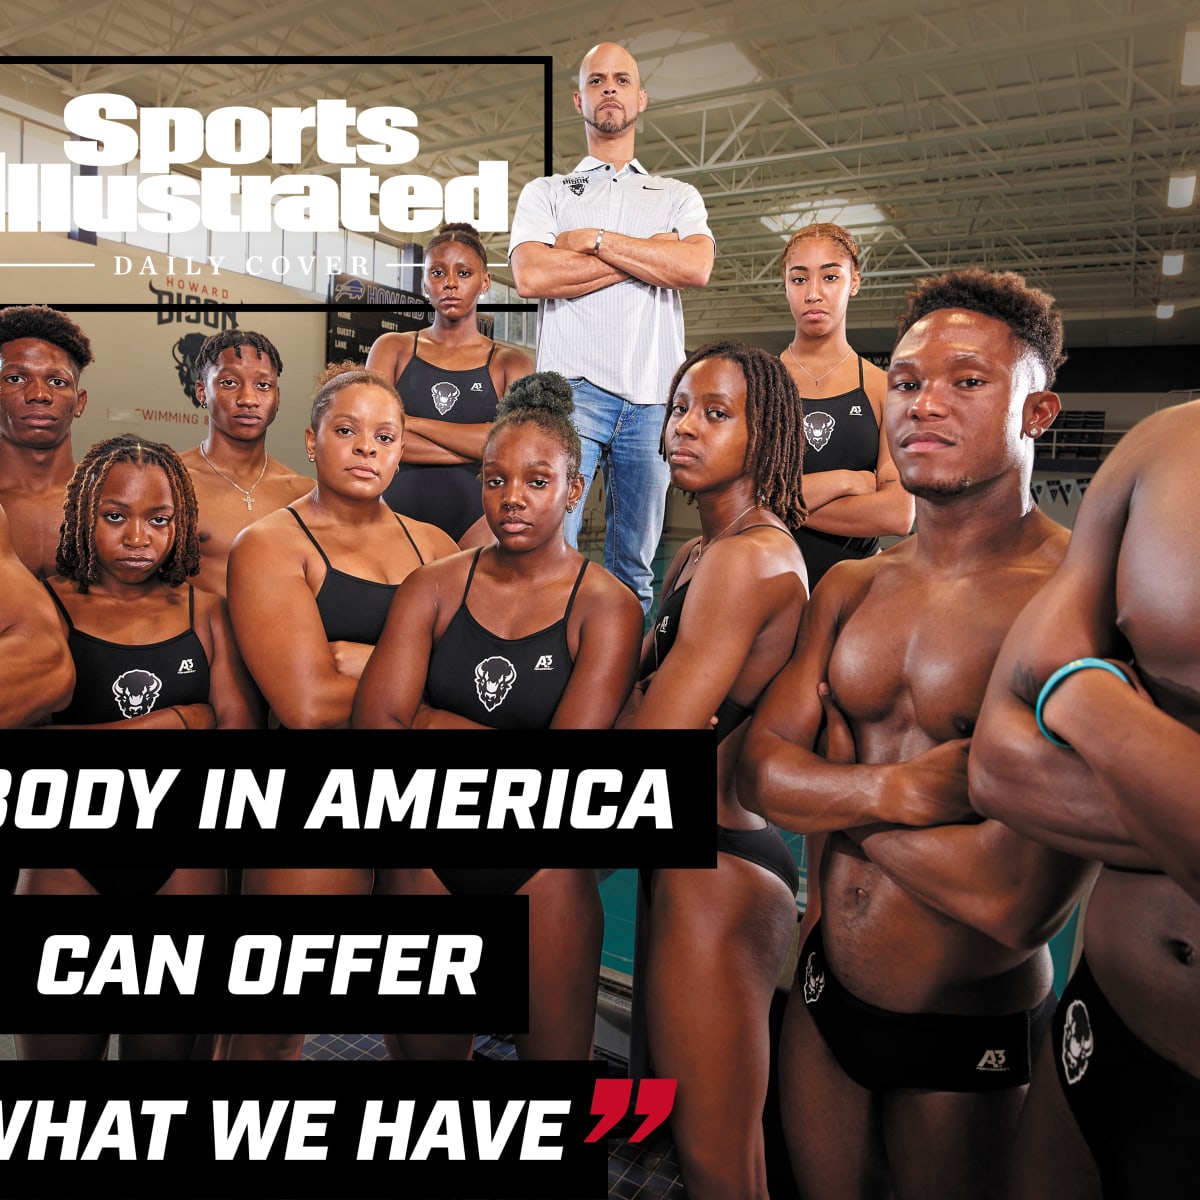 The Howard Bison, the only all-black team in college swimming, are changing  the sport - Sports Illustrated